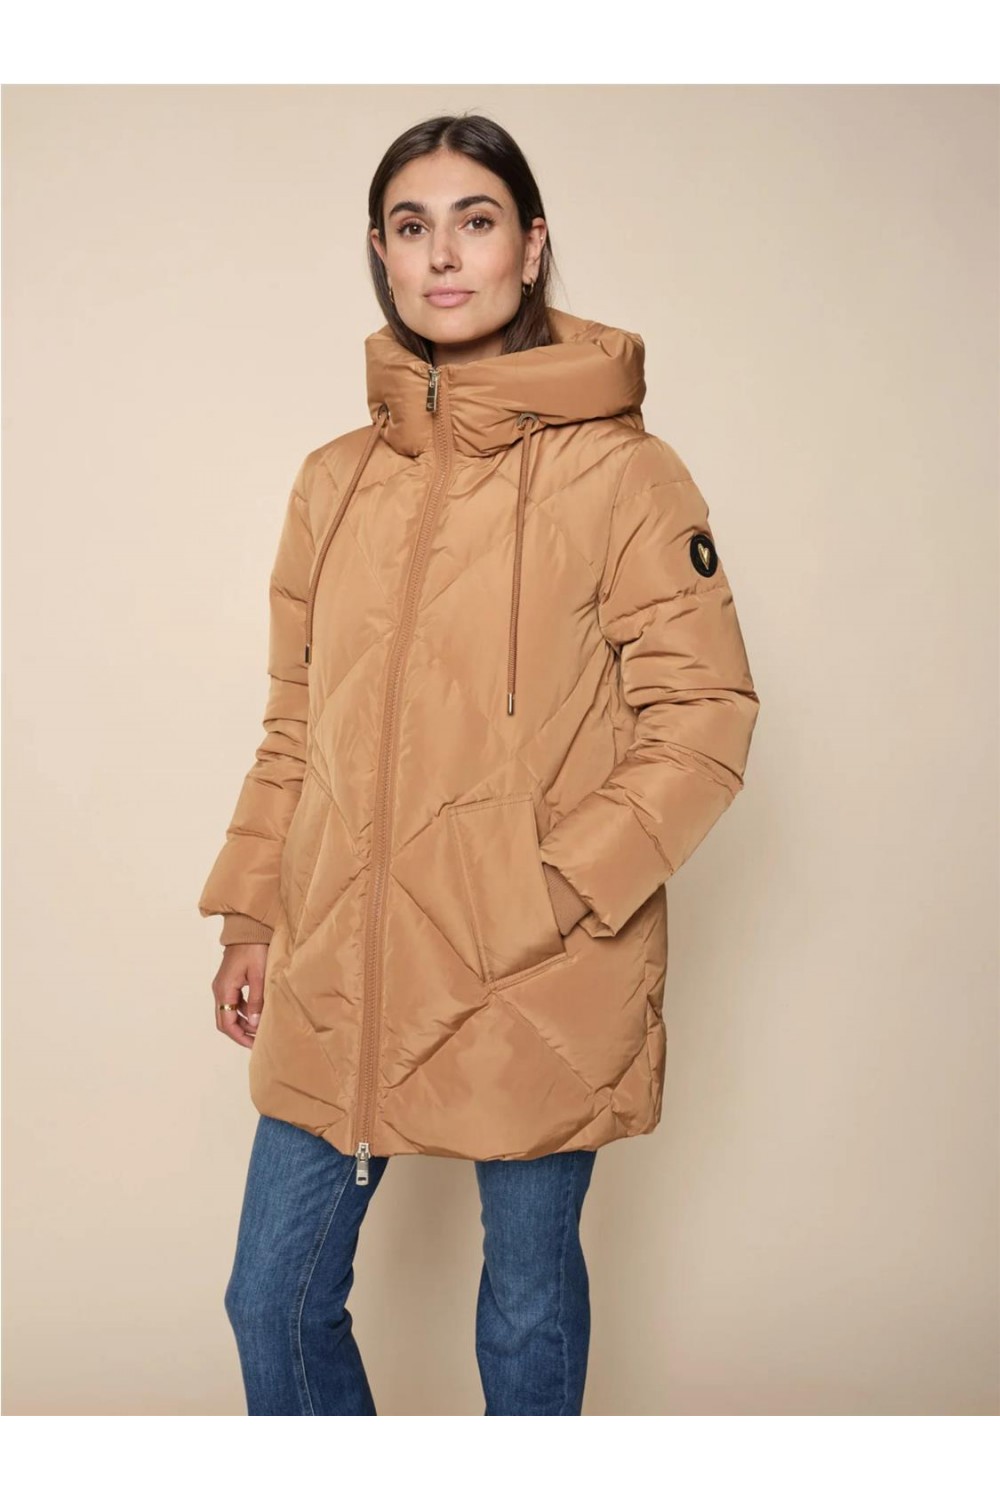 Anorak plumón mujer